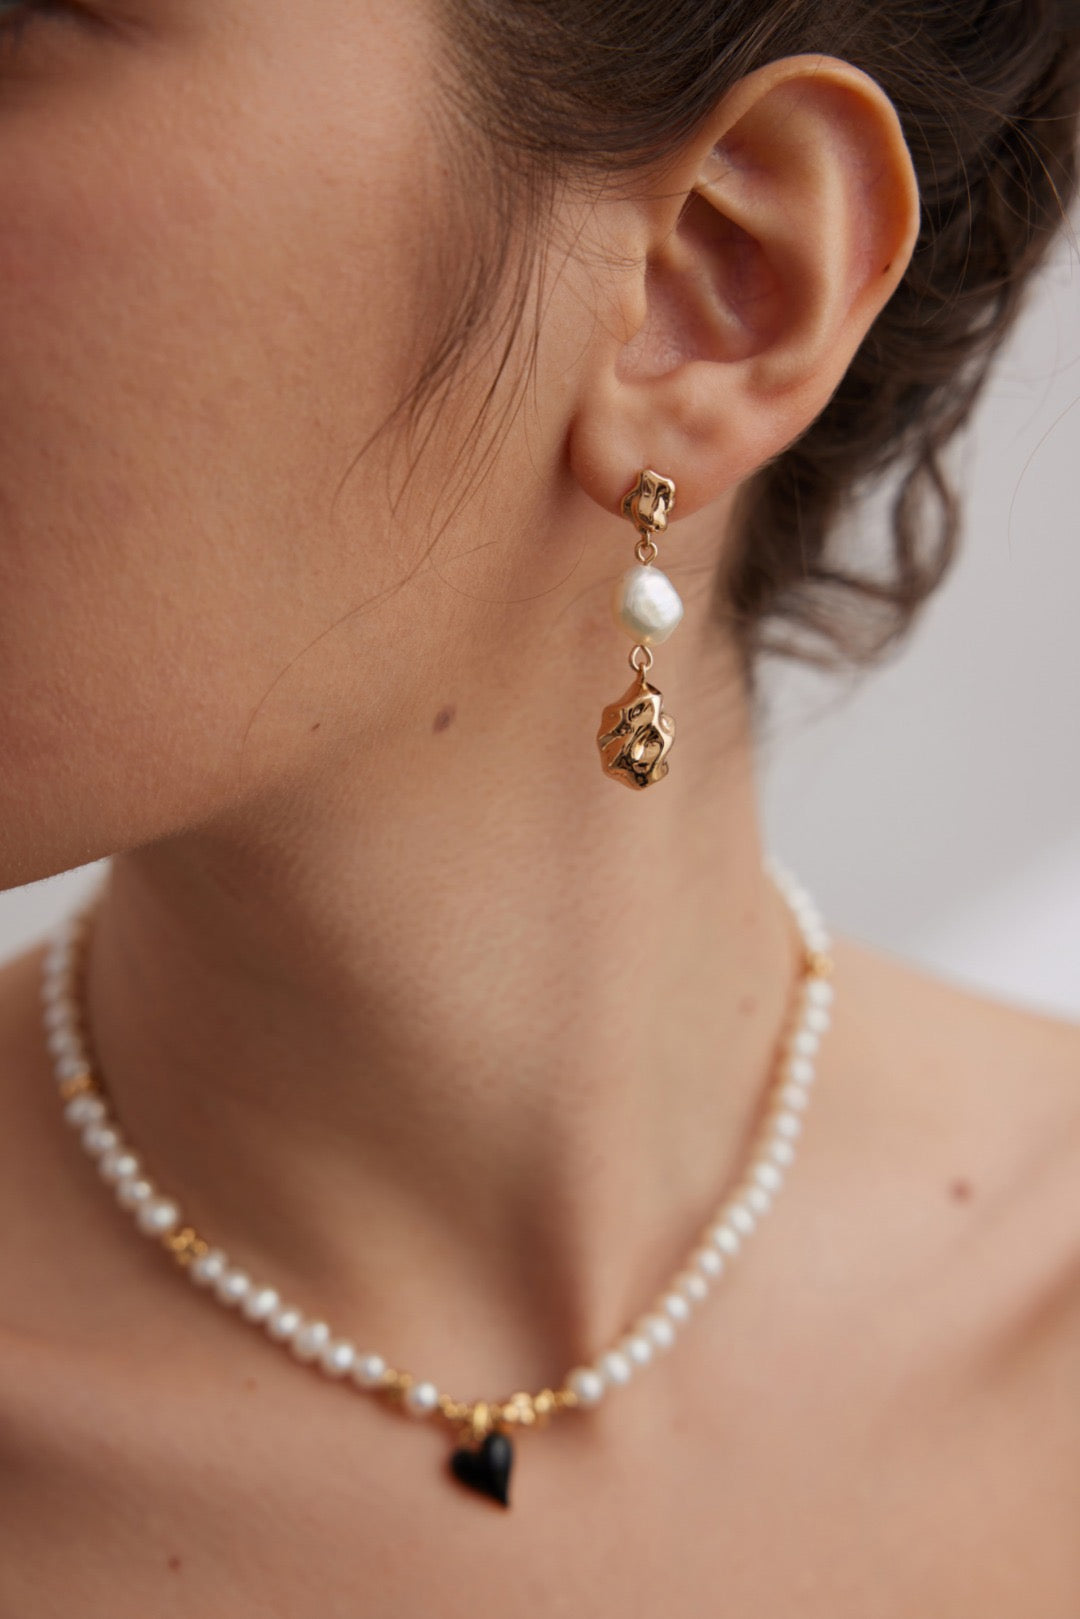 The Pearl Collection by YACC Jewelry: Exploring the Beauty of Colorful Pearls